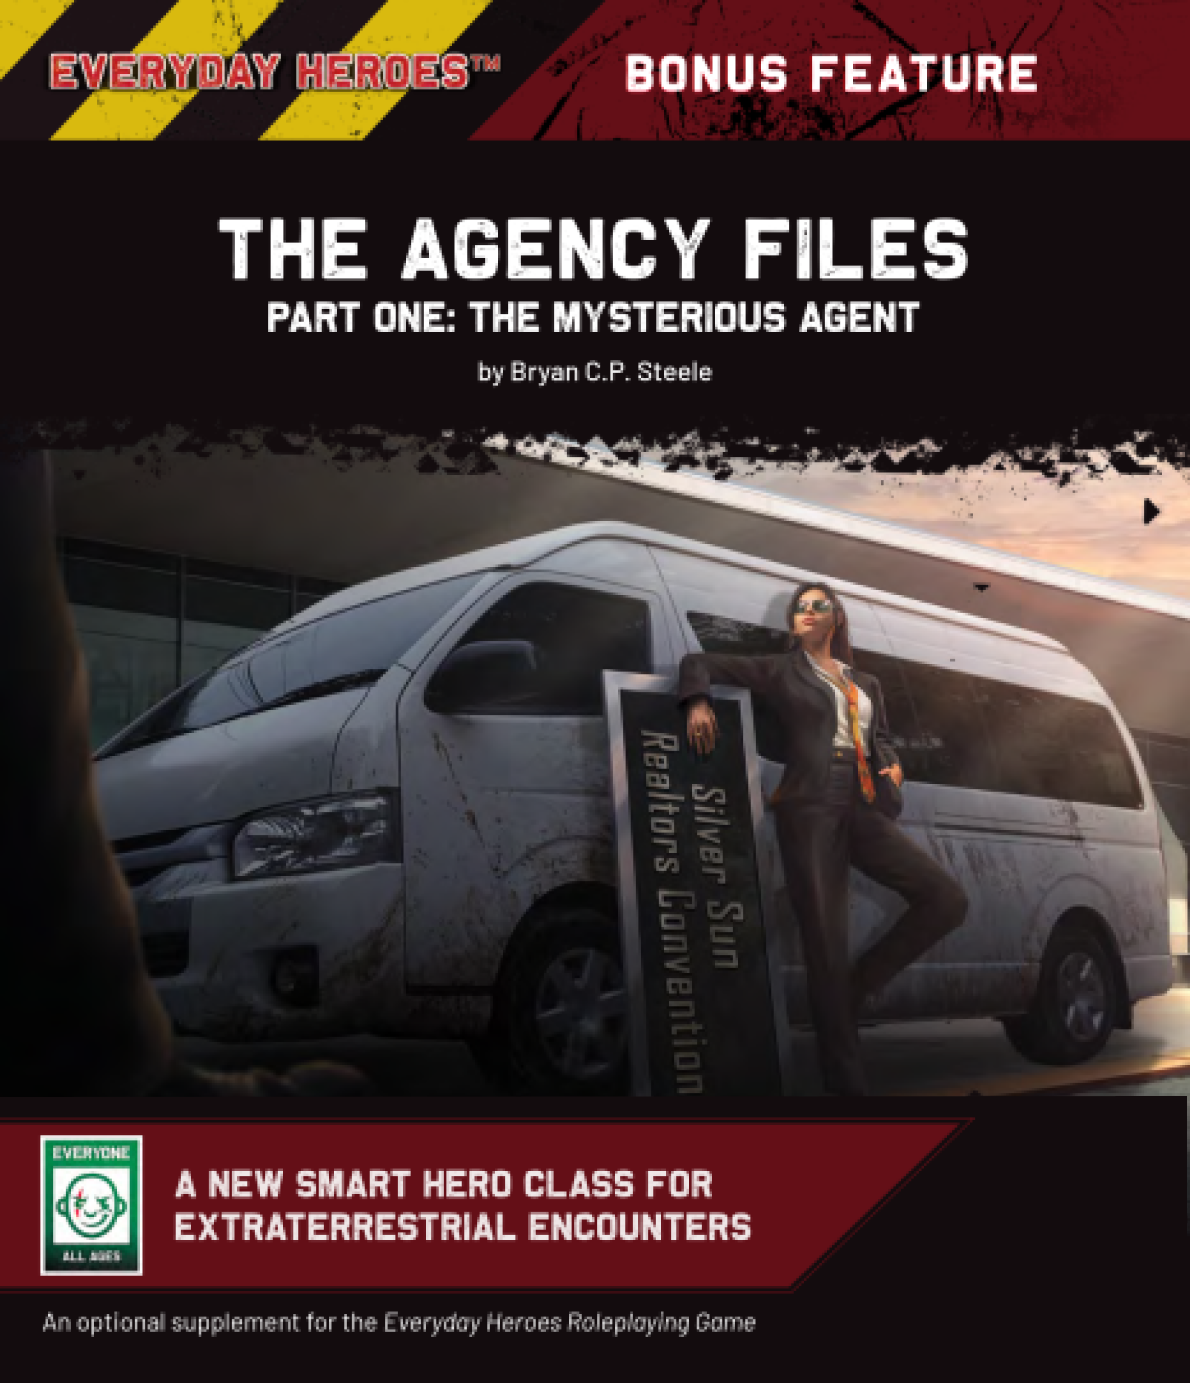 The Agency Files - Part One: The Mysterious Agent